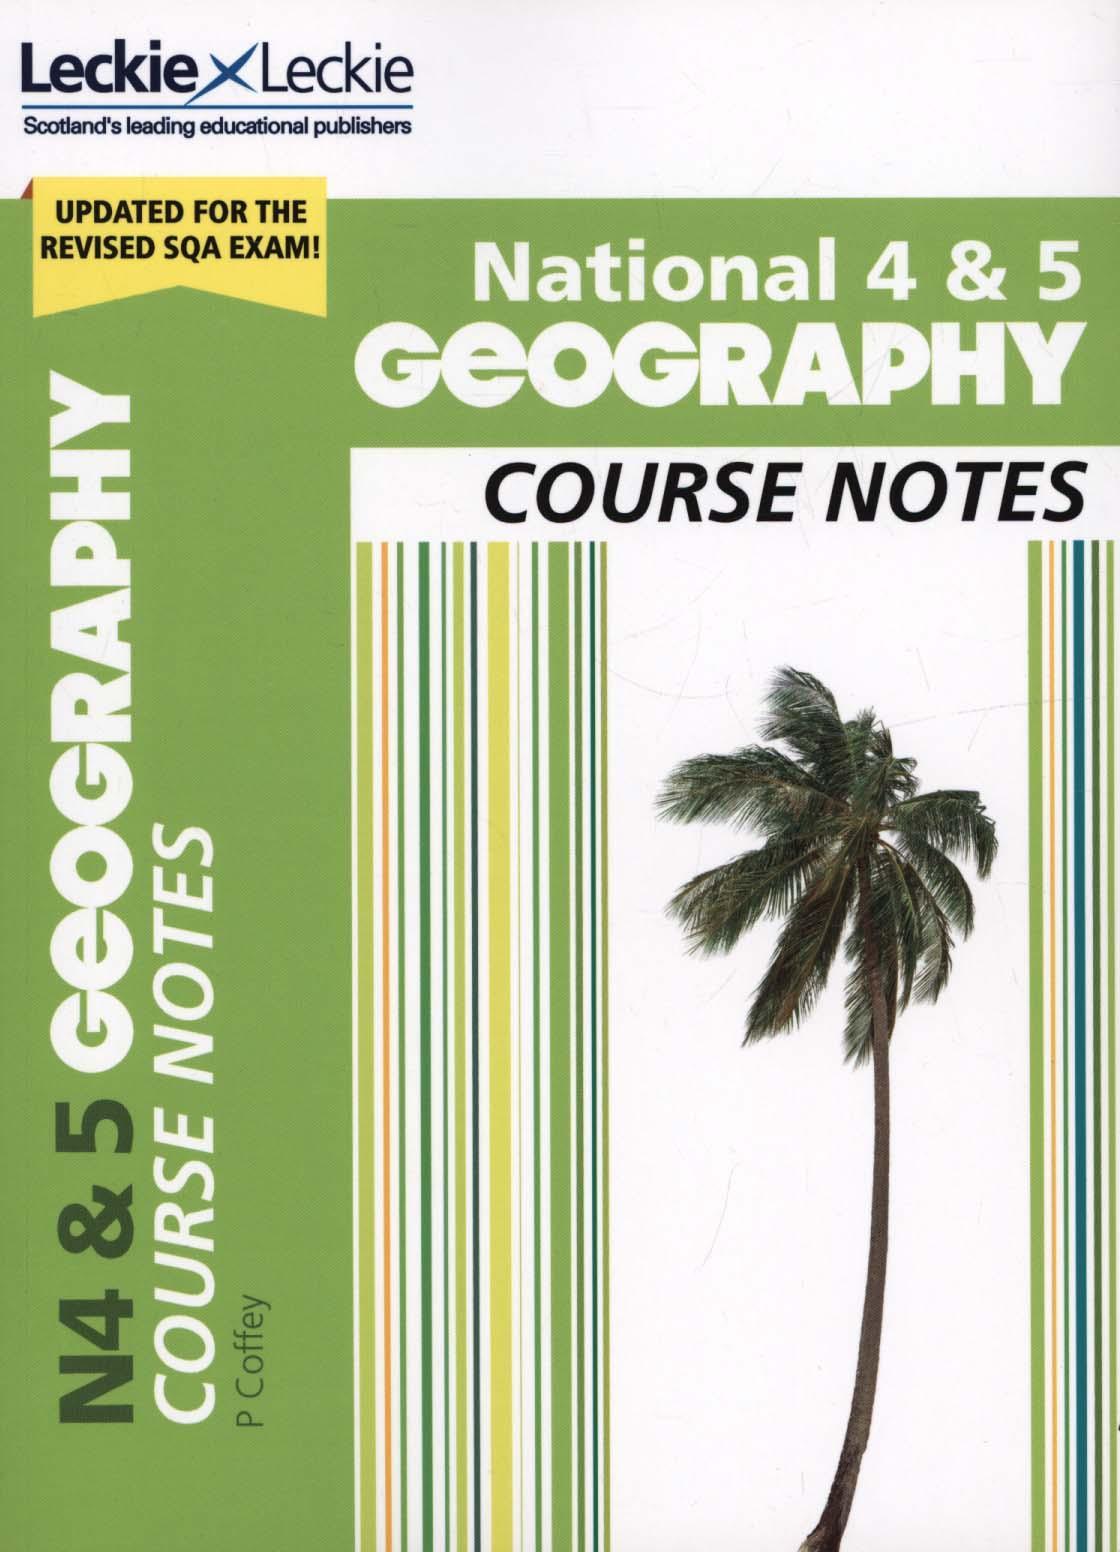 National 4/5 Geography Course Notes for New 2019 Exams